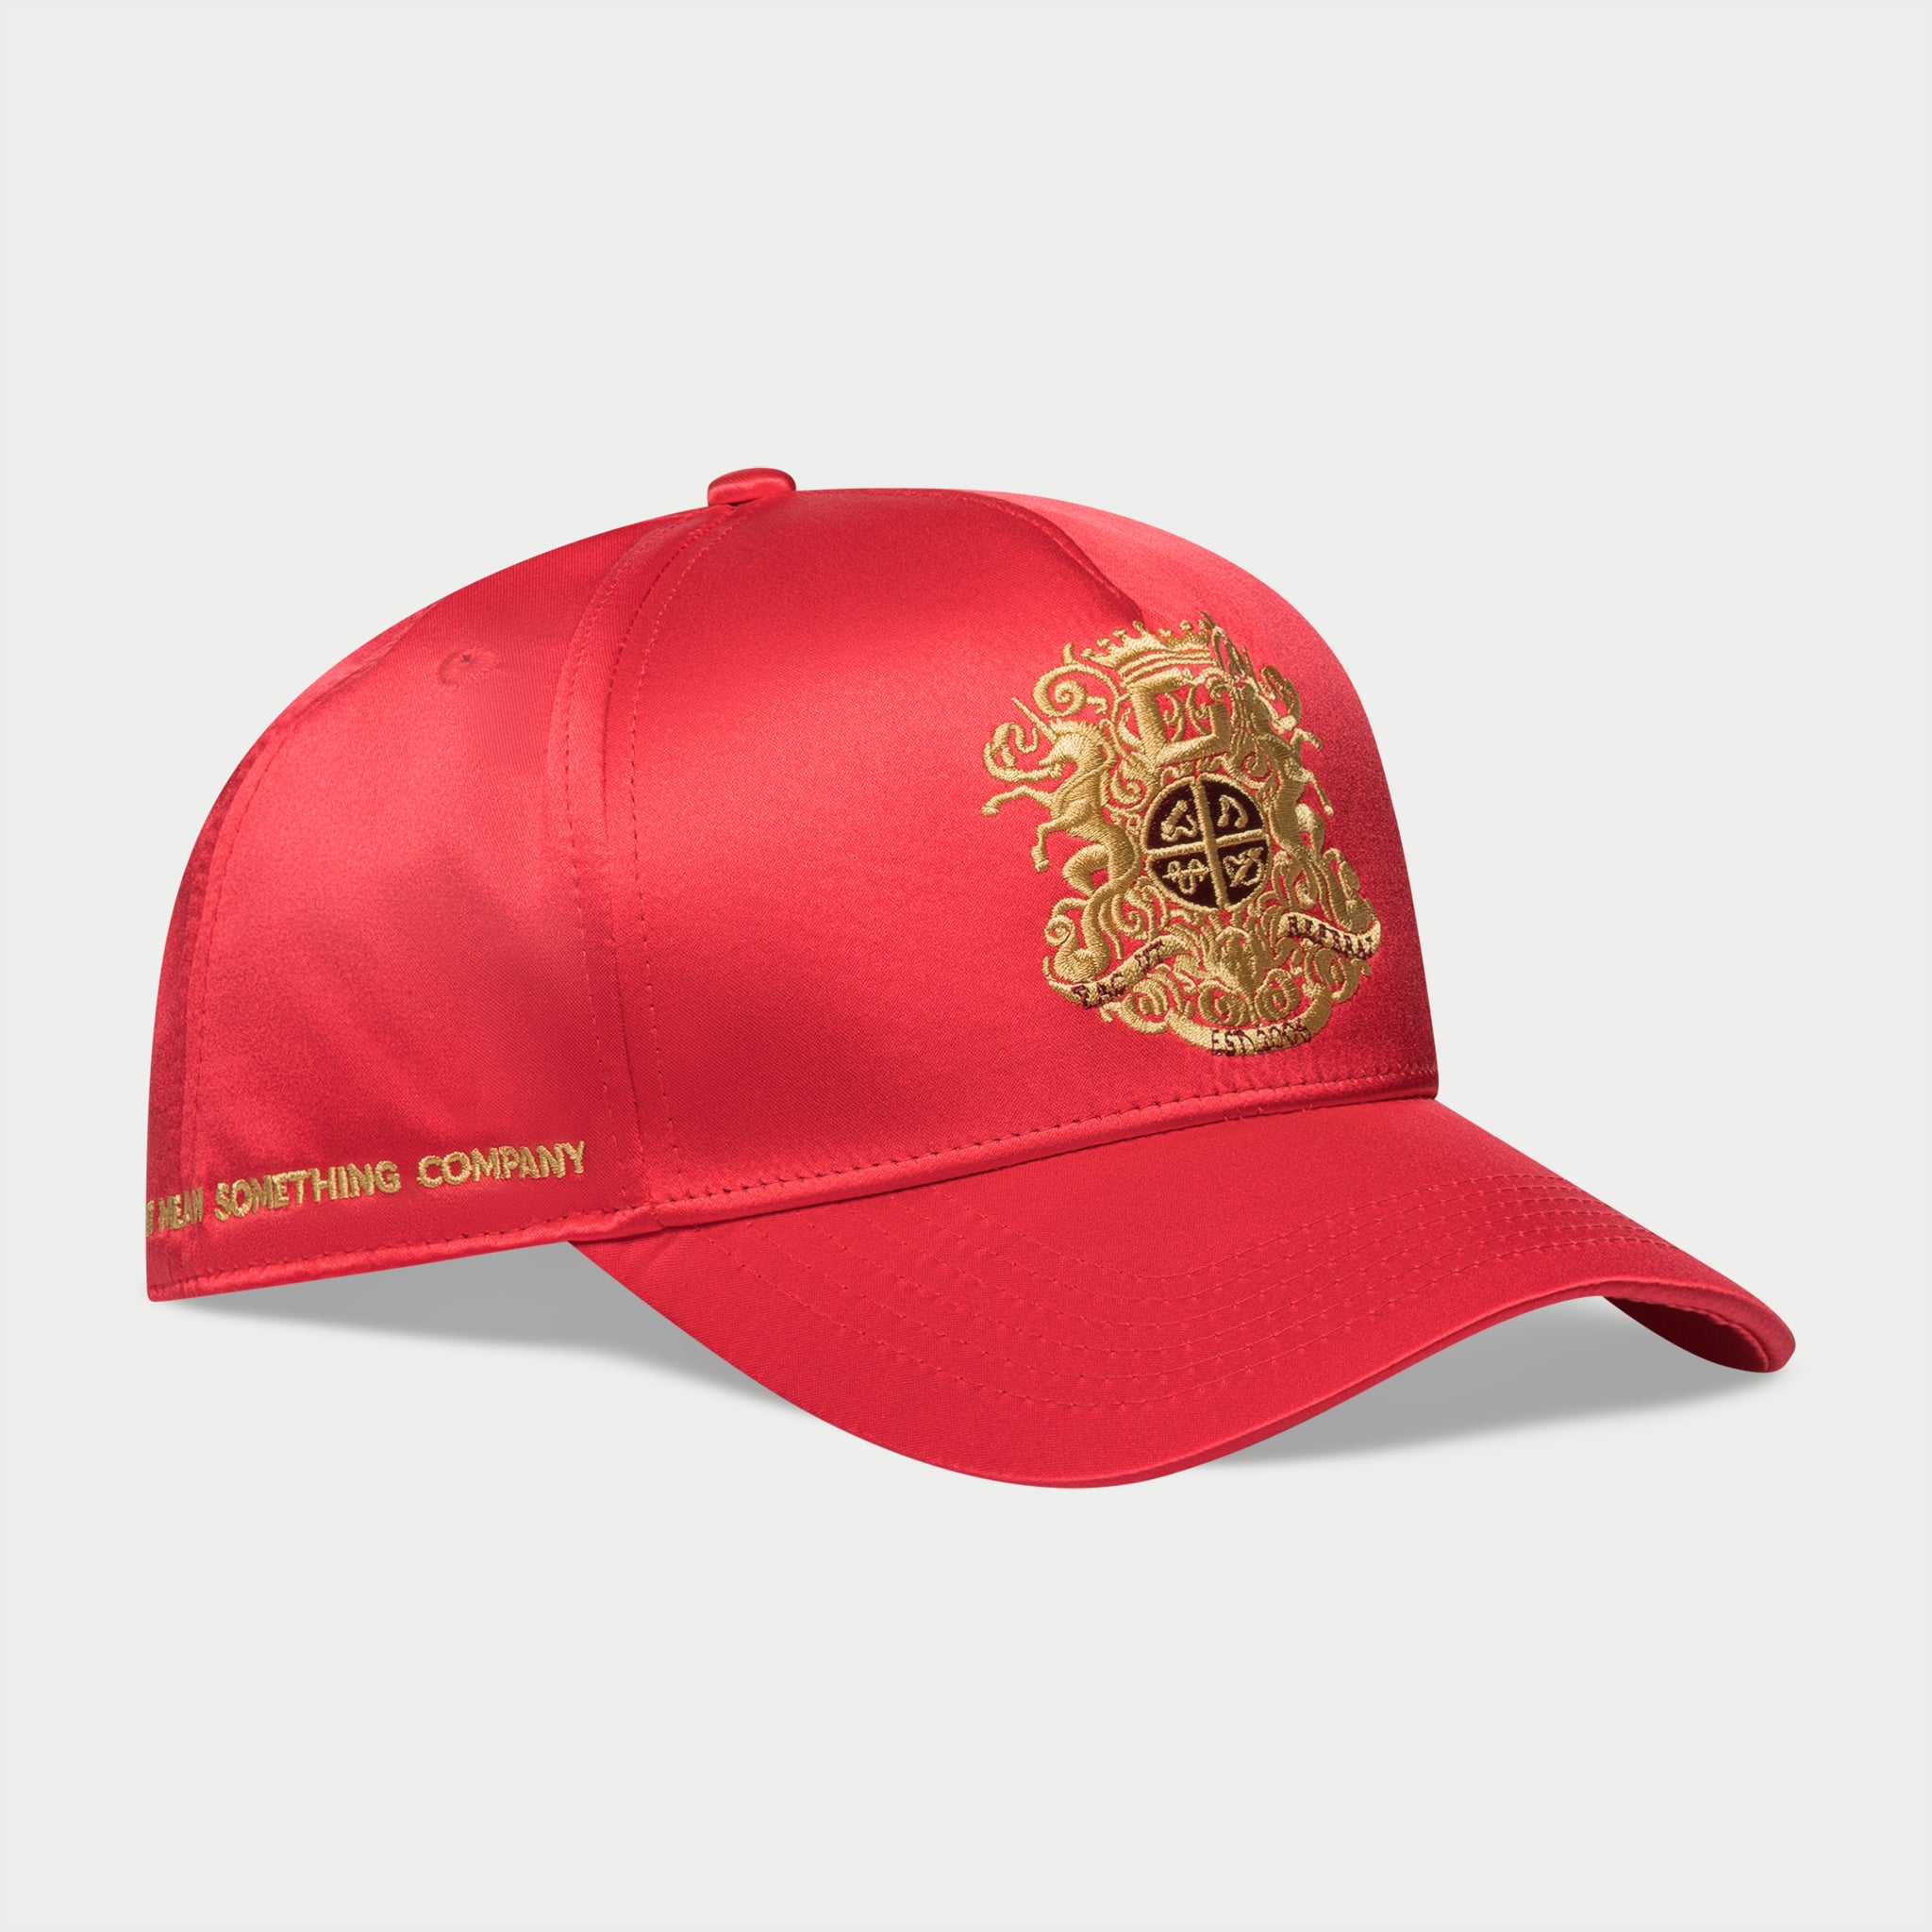 G Couture Cap - Red